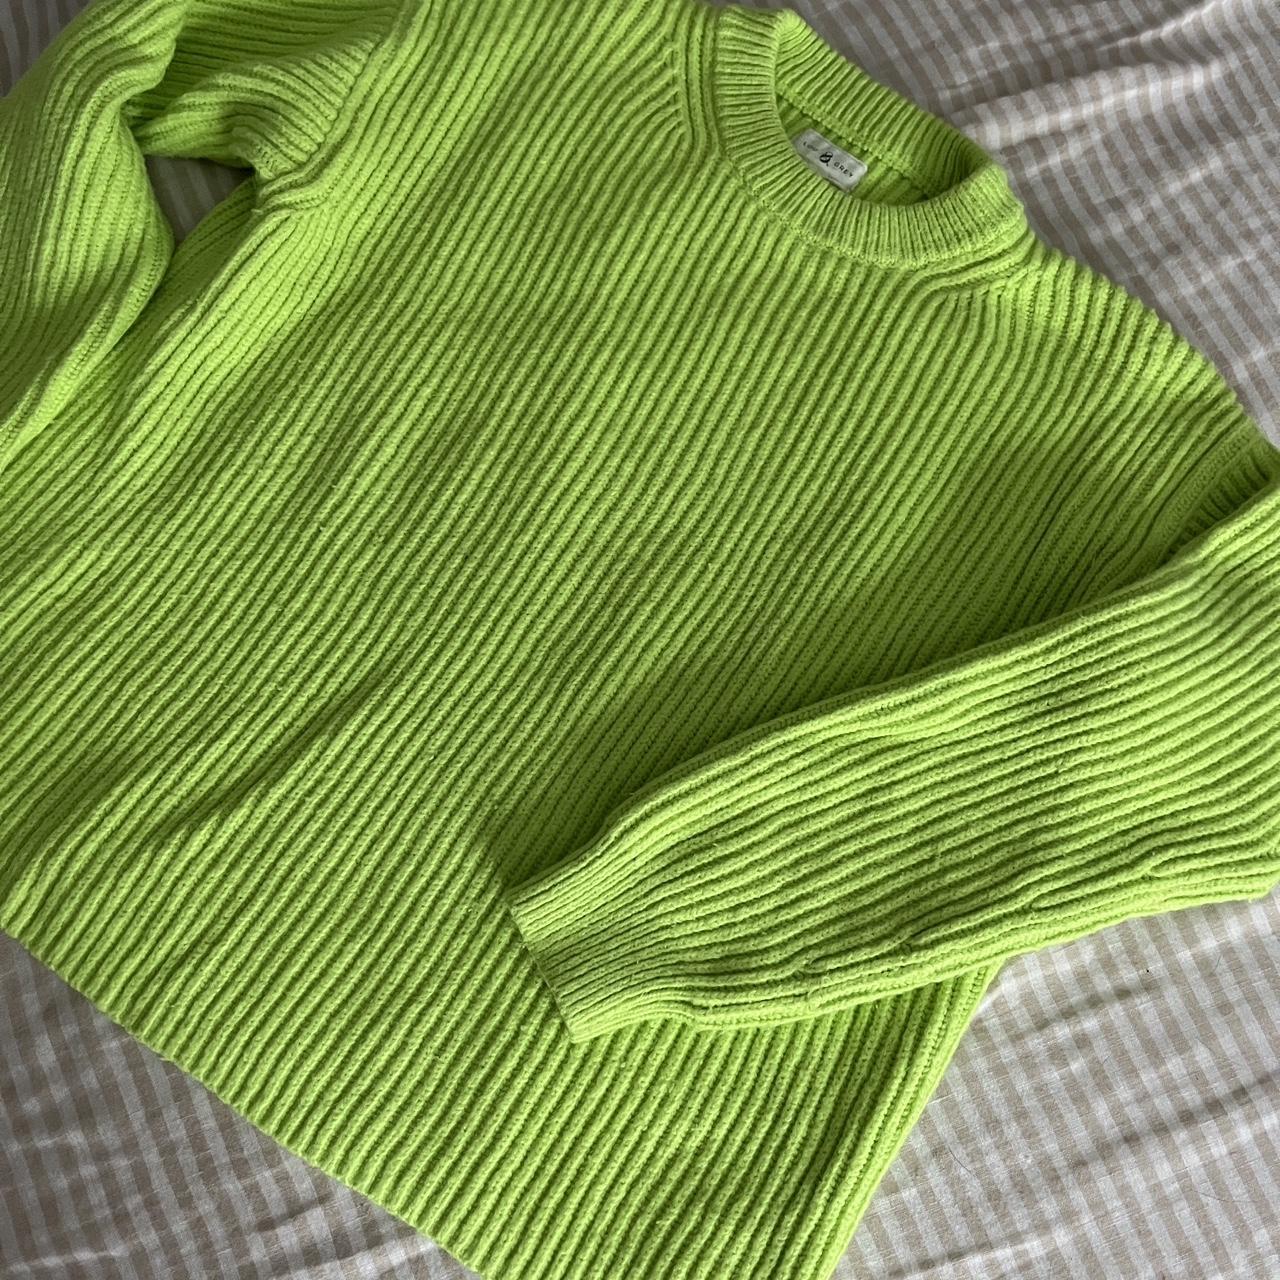 Lou & Grey Sweater Size S Cool green color! - Depop